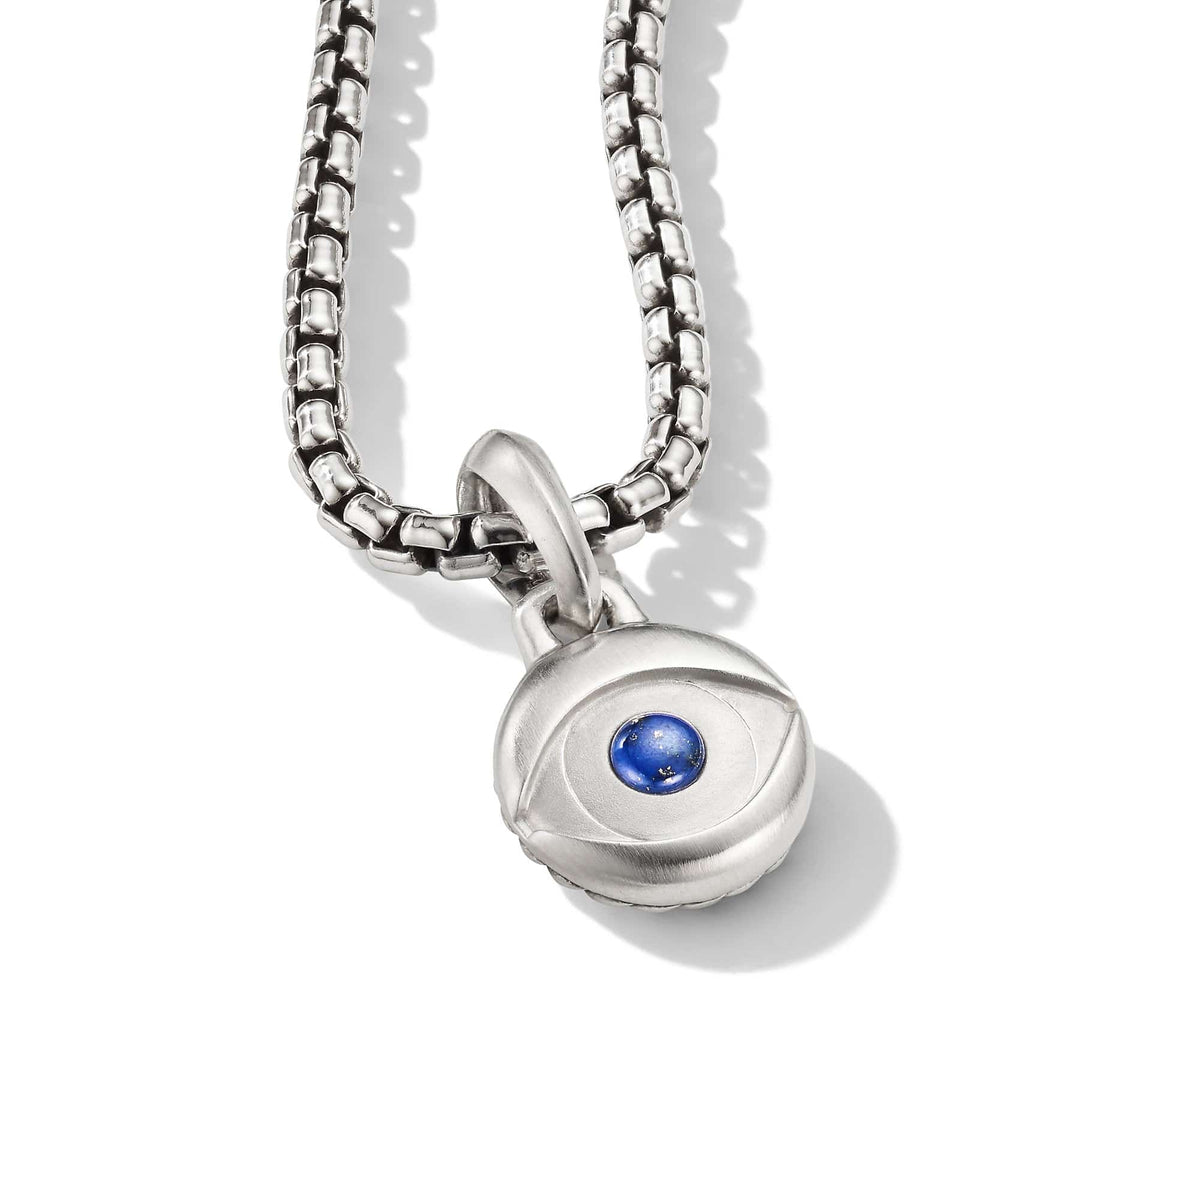 Eveil Eye Amulet In Sterling Silver with Lapis